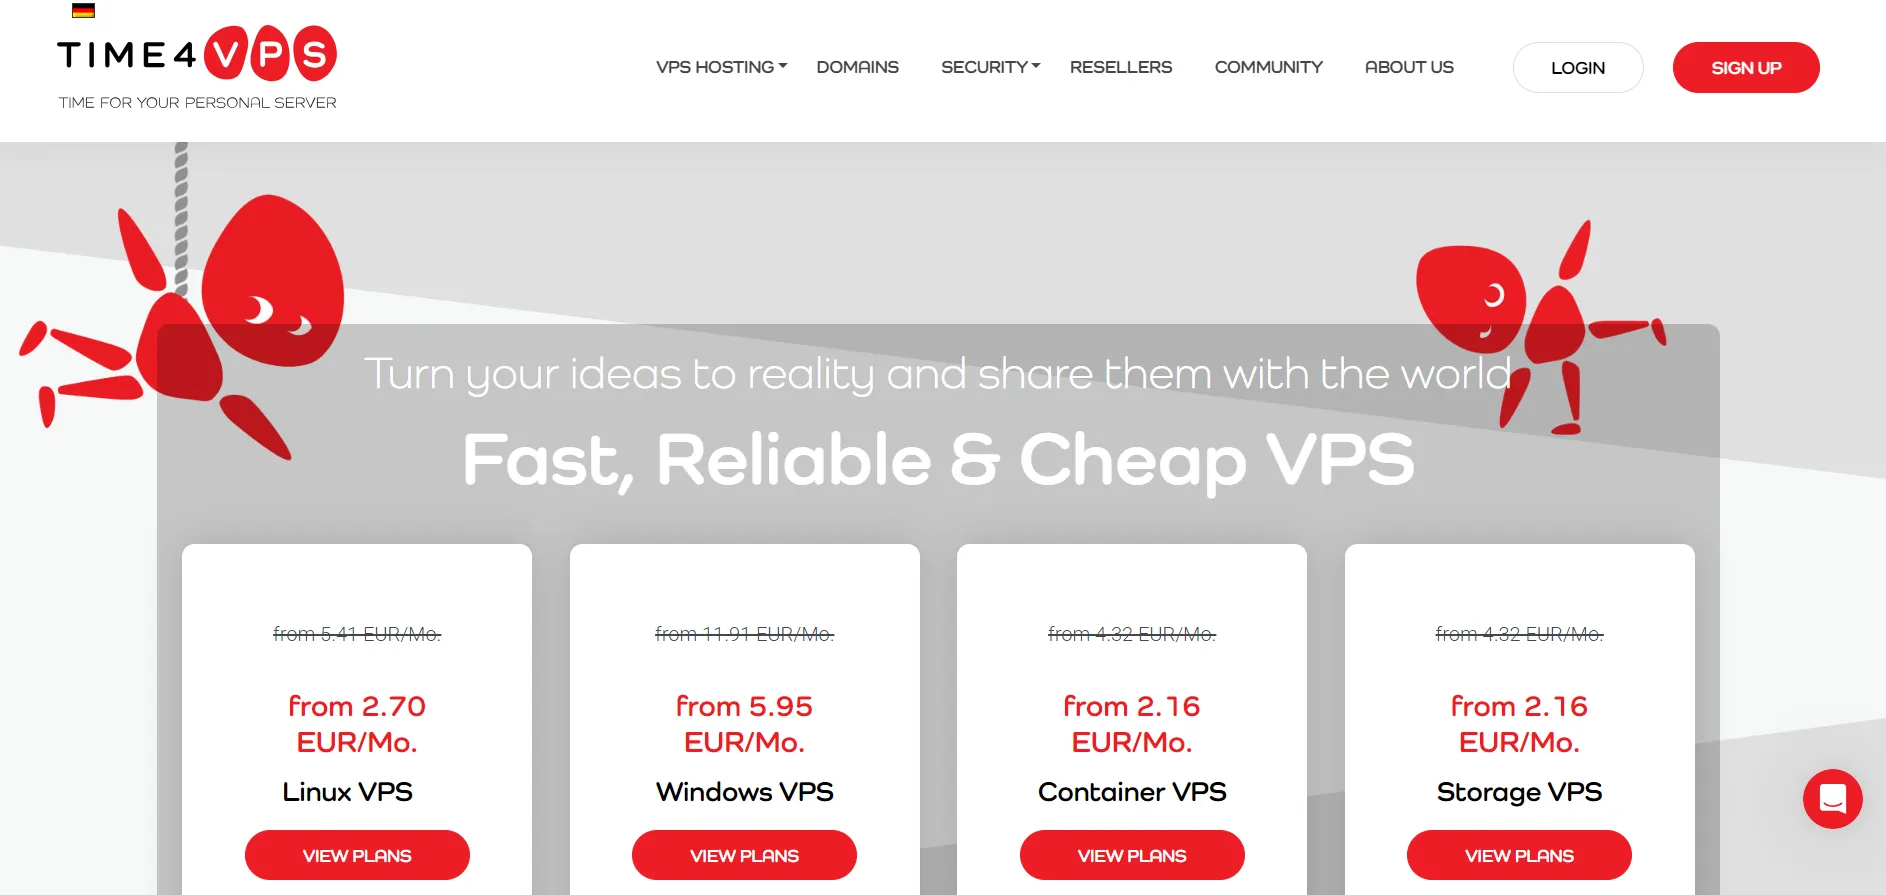 Time4vps Homepage